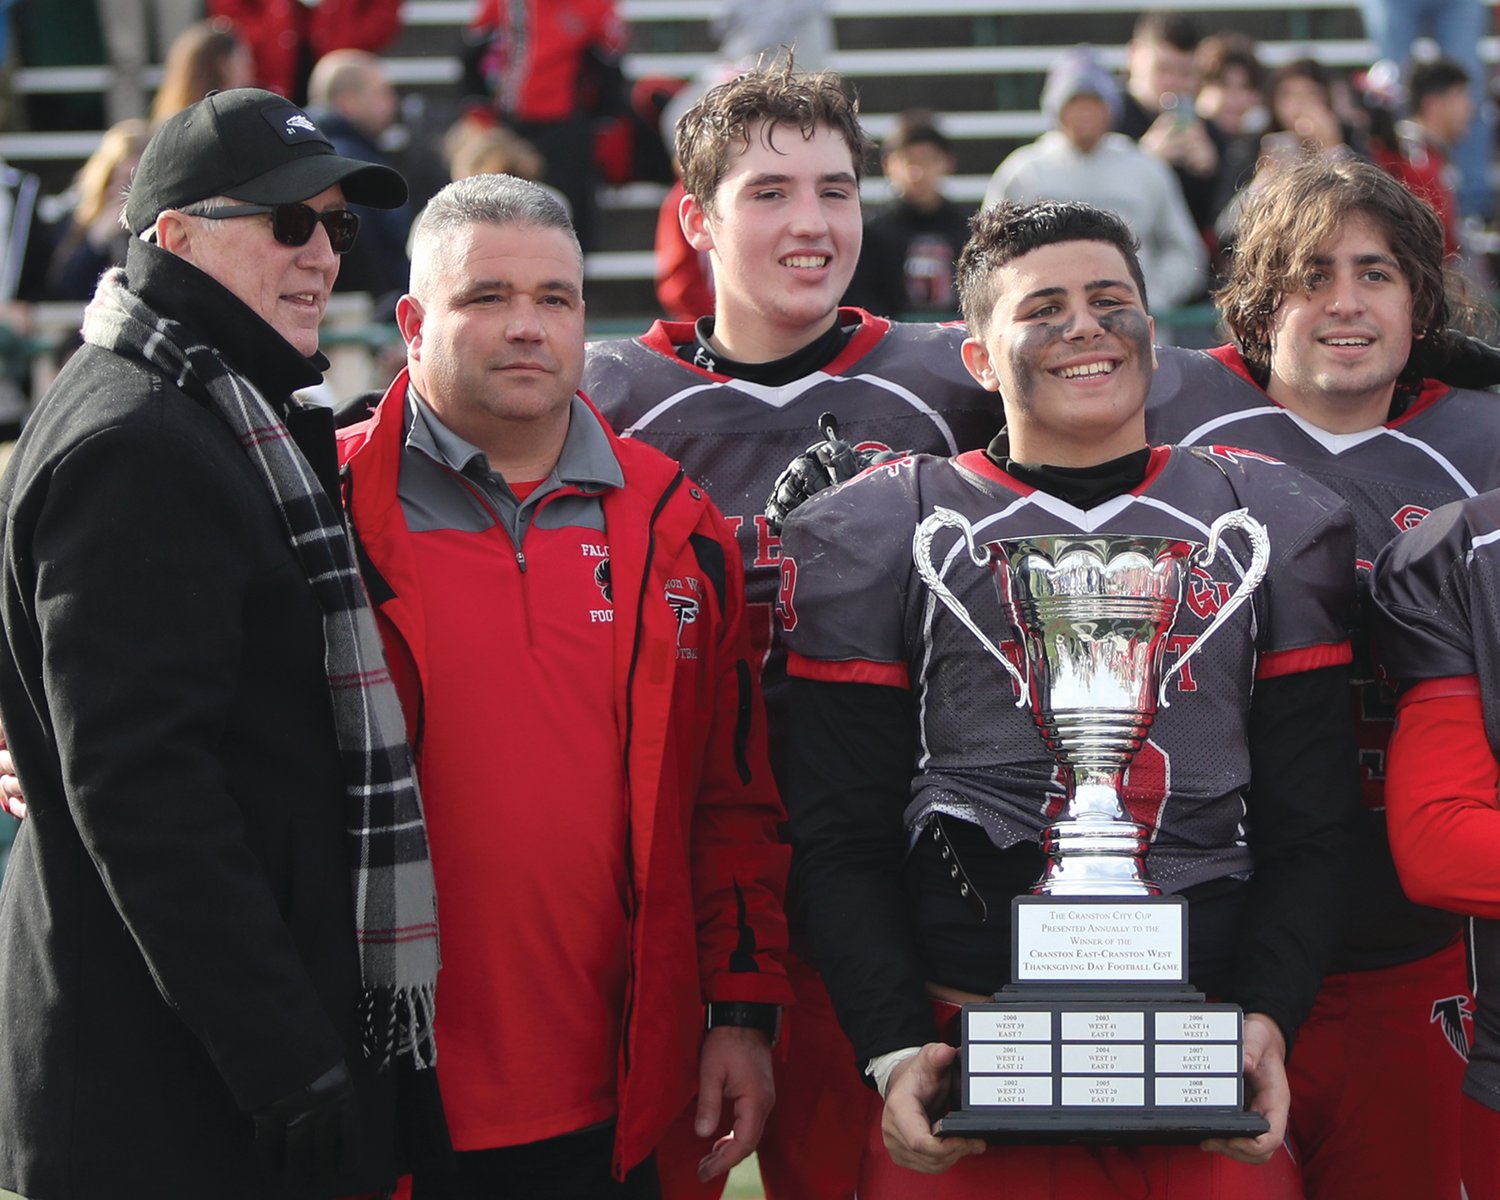 GETTING THE WIN: Cranston Mayor Ken Hopkins (far left) presents the Thanksgiving trophy to West’s Tom Milewski,
Jacob Robert, Teddy Shakelford and Anthony Perrotta.